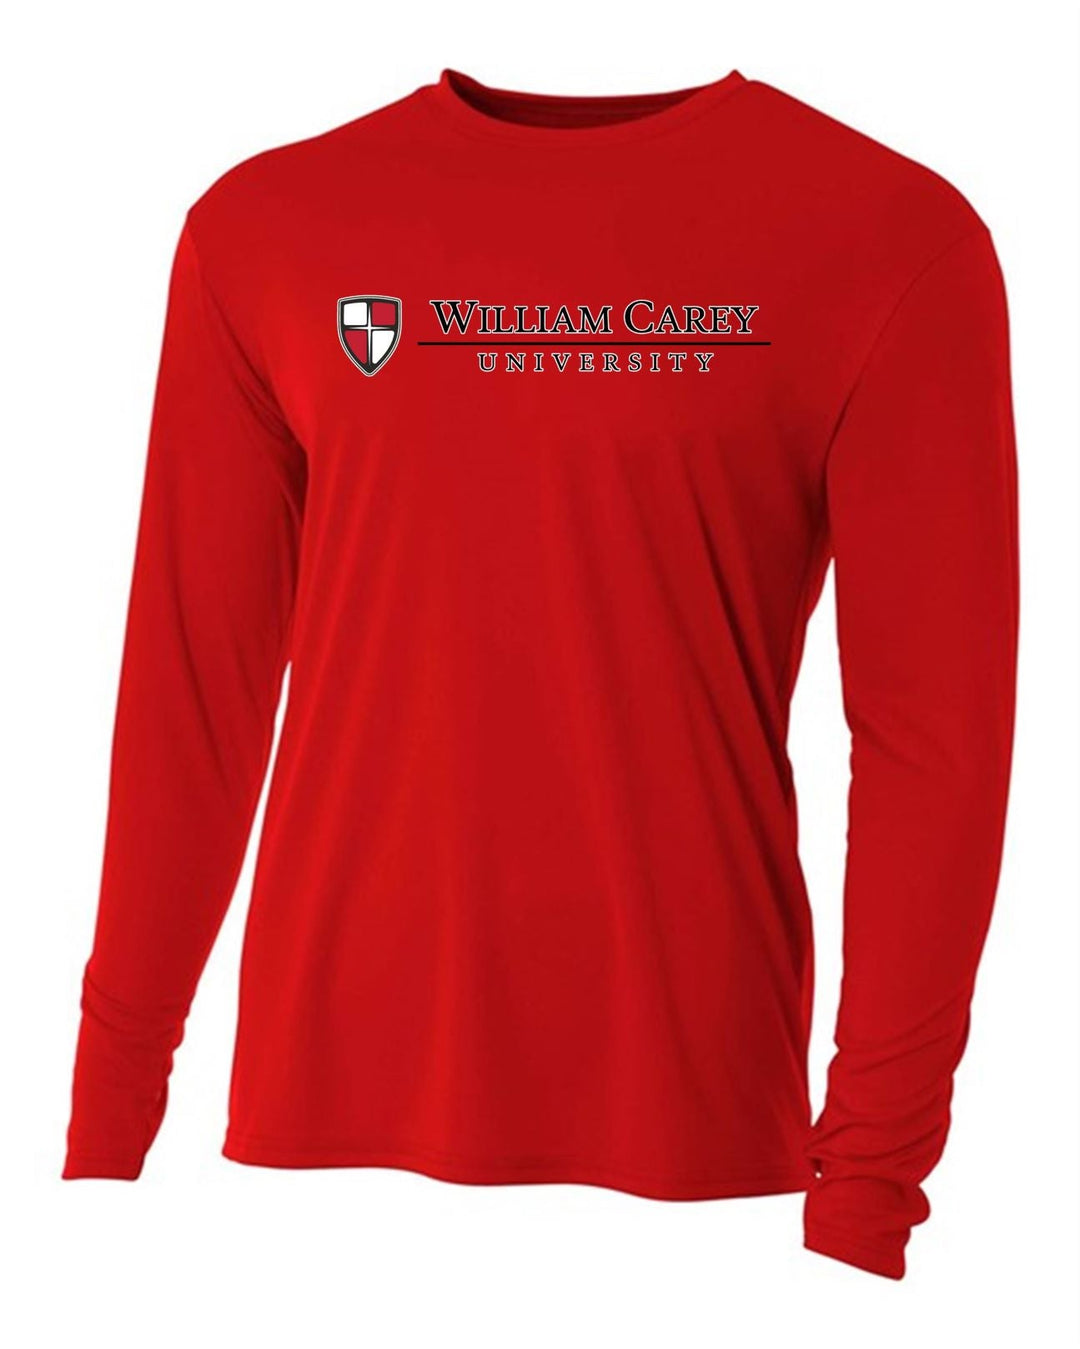 WCU Tradition Campus Youth Long-Sleeve Performance Shirt WCU TC Red Youth Small - Third Coast Soccer